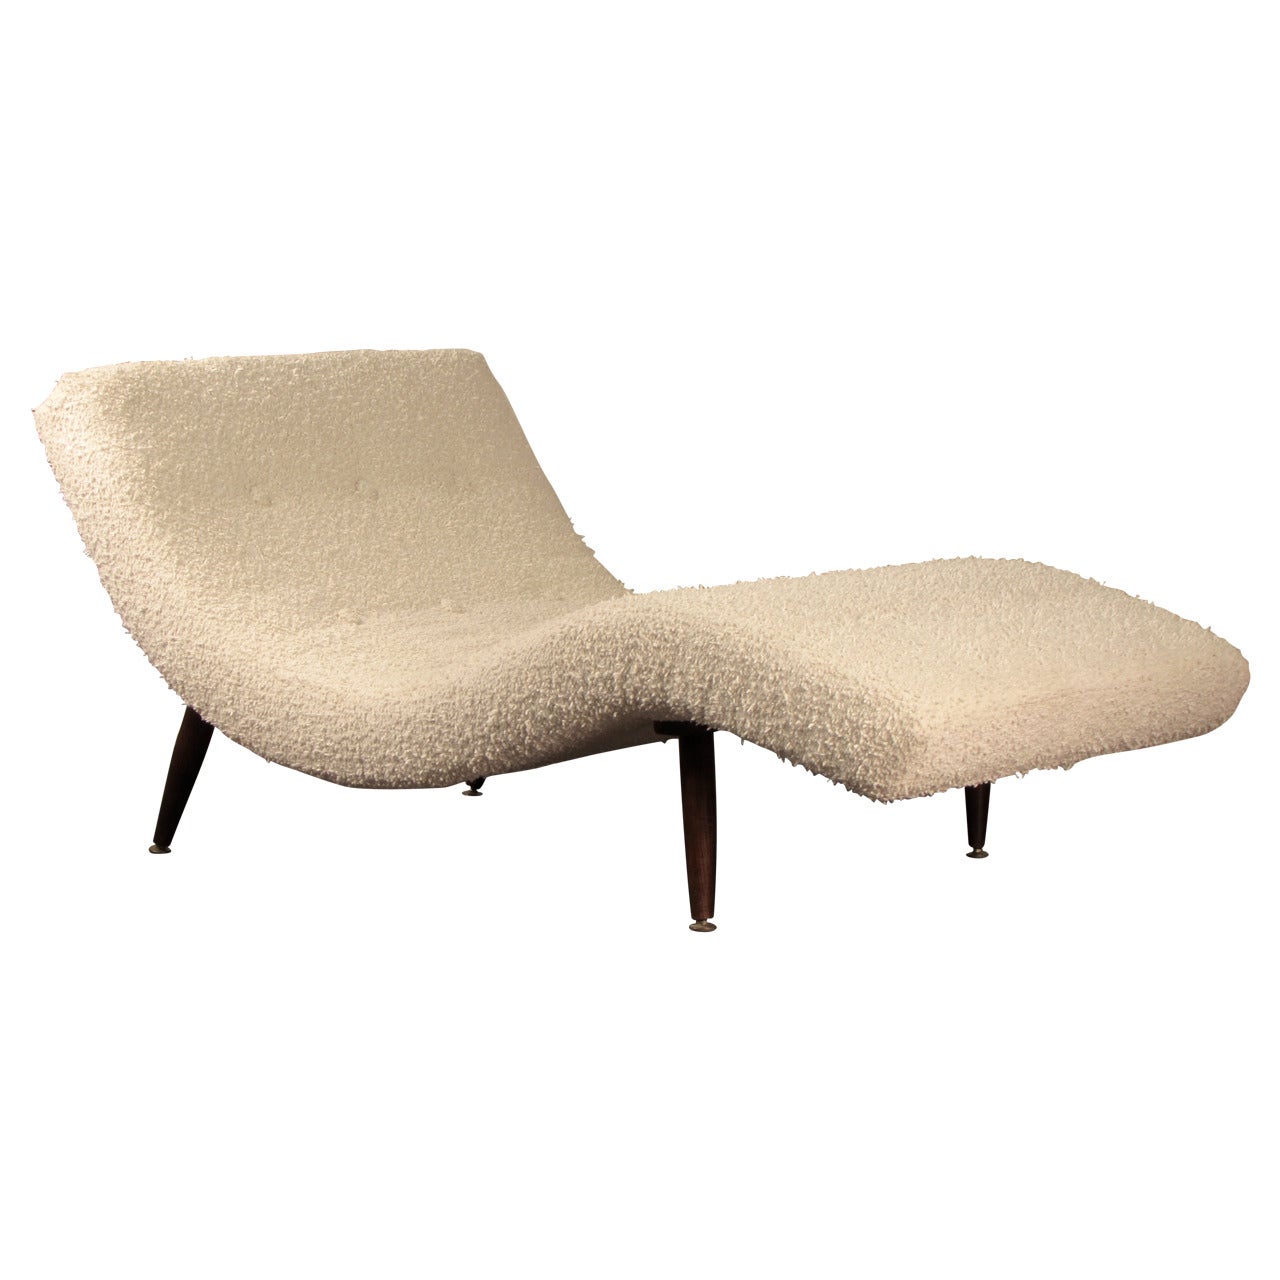 Undulating Wave Chaise Lounge by Adrian Pearsall for Craft Associates, 1960s